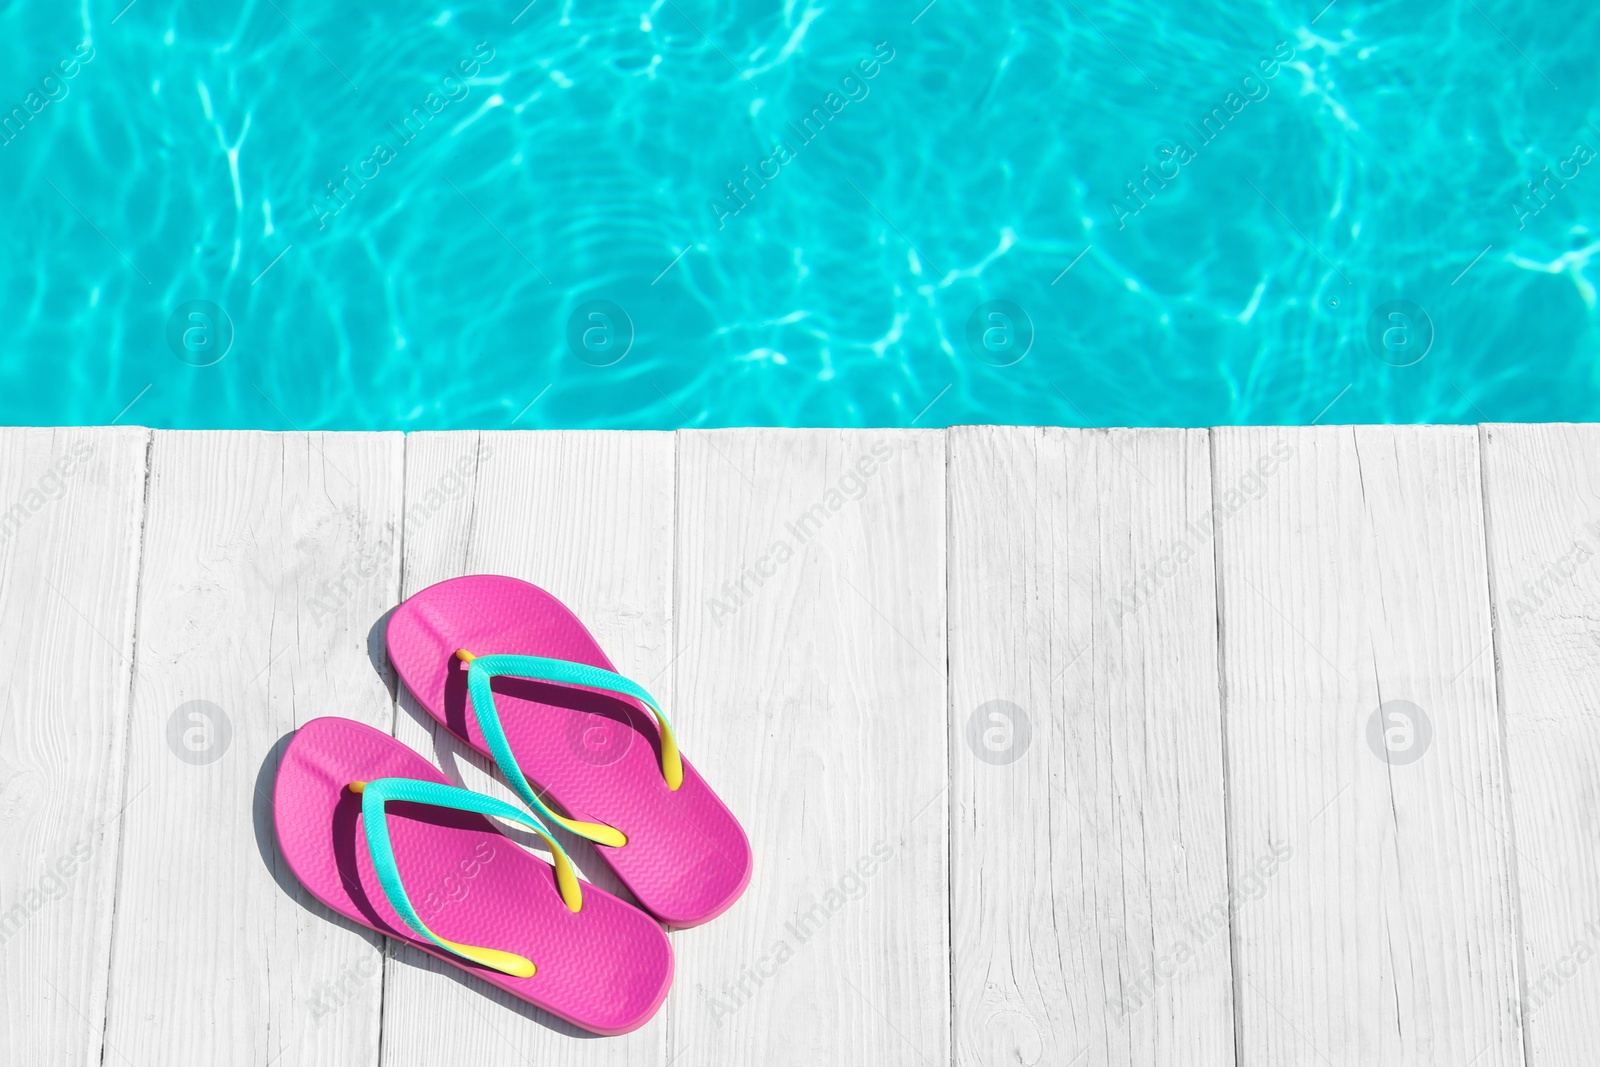 Photo of Slippers on wooden deck near swimming pool, top view with space for text. Beach accessory